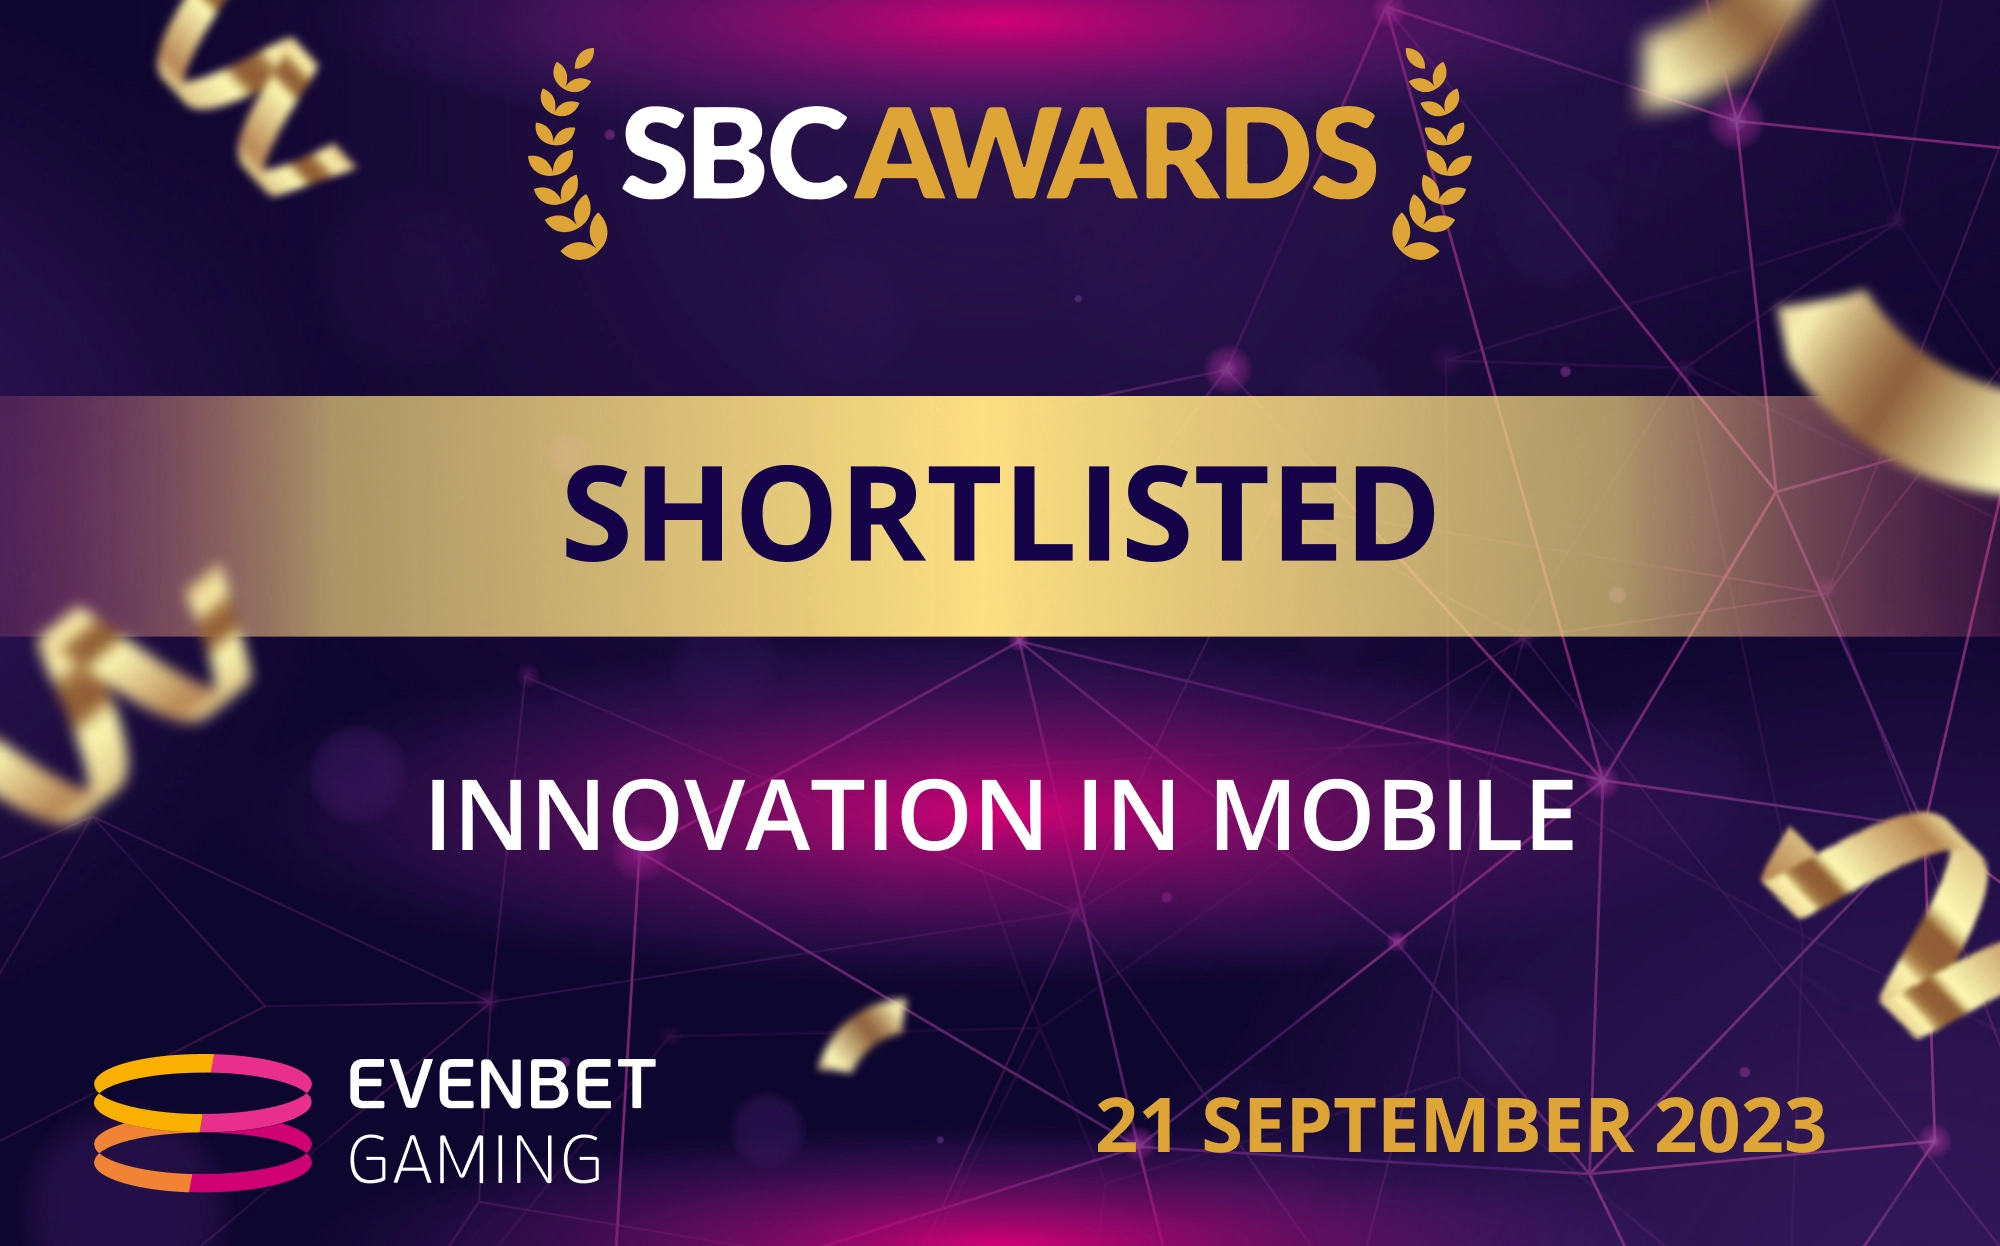 EvenBet Gaming Is Shortlisted for SBC Awards